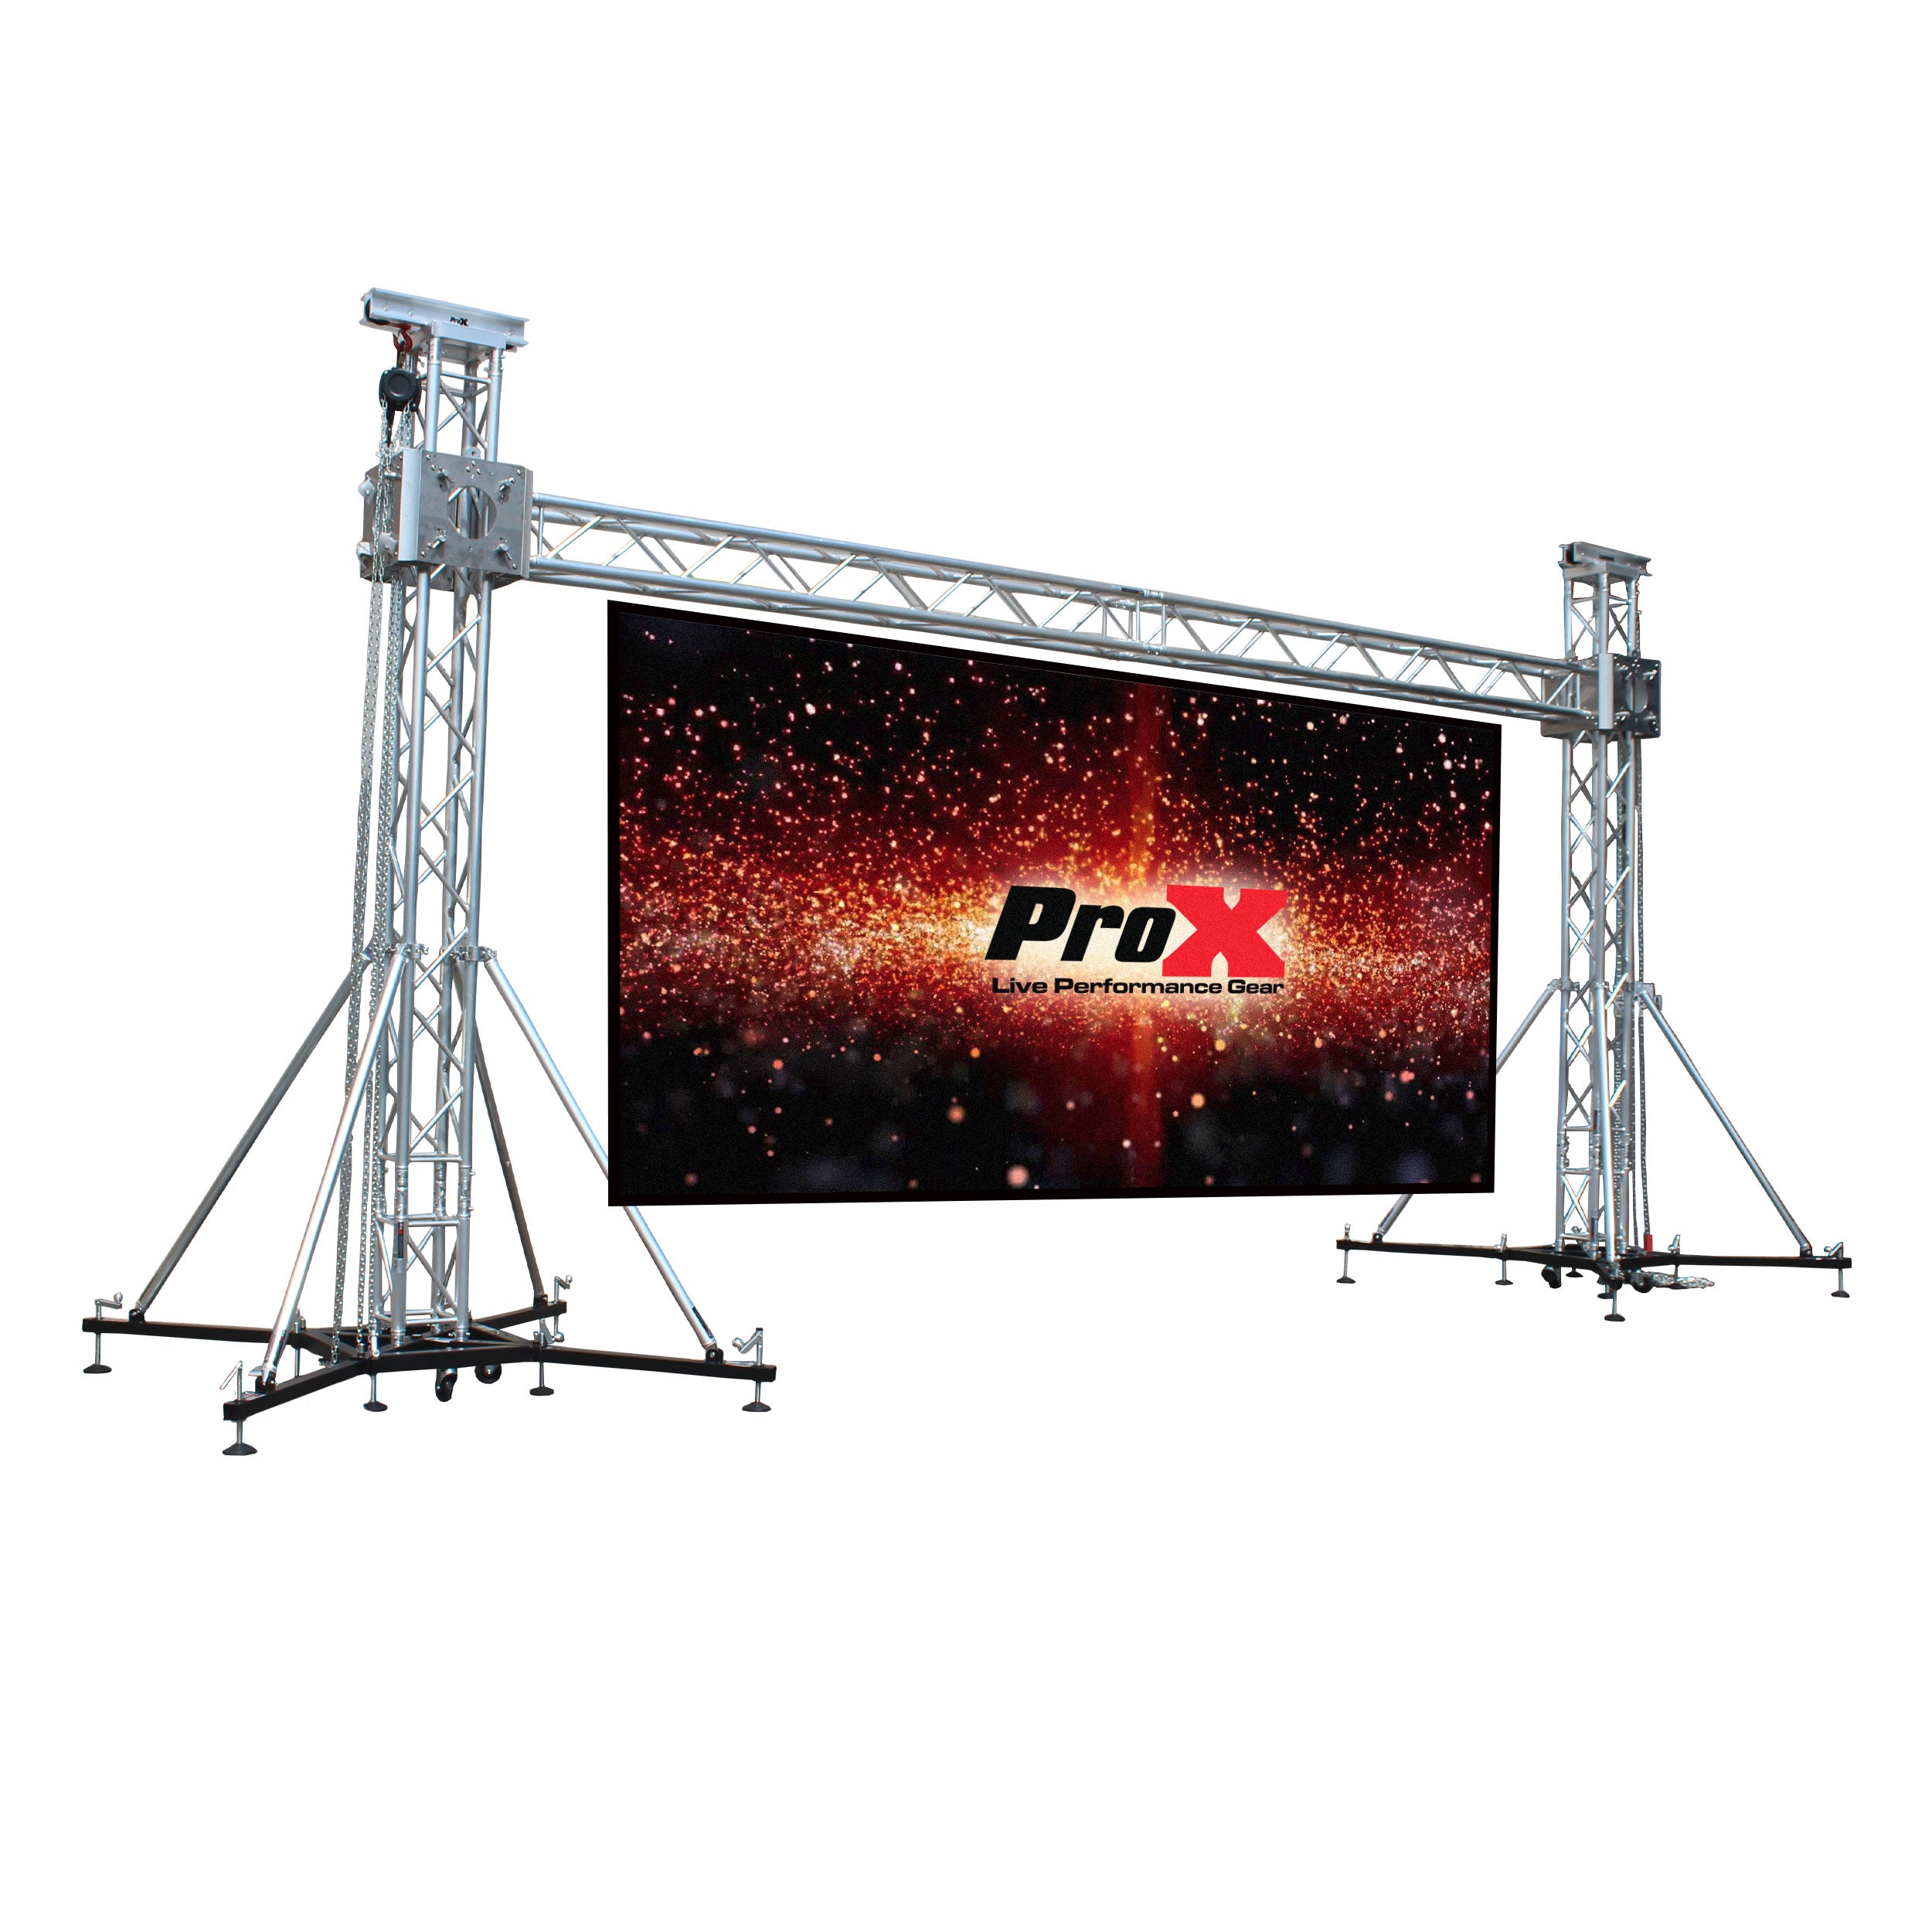 Pro X LED Screen Display Panel Video Fly Wall Truss Ground Support System 20'W x 23'H Outdoor w/ Hoist XTP-GS2023